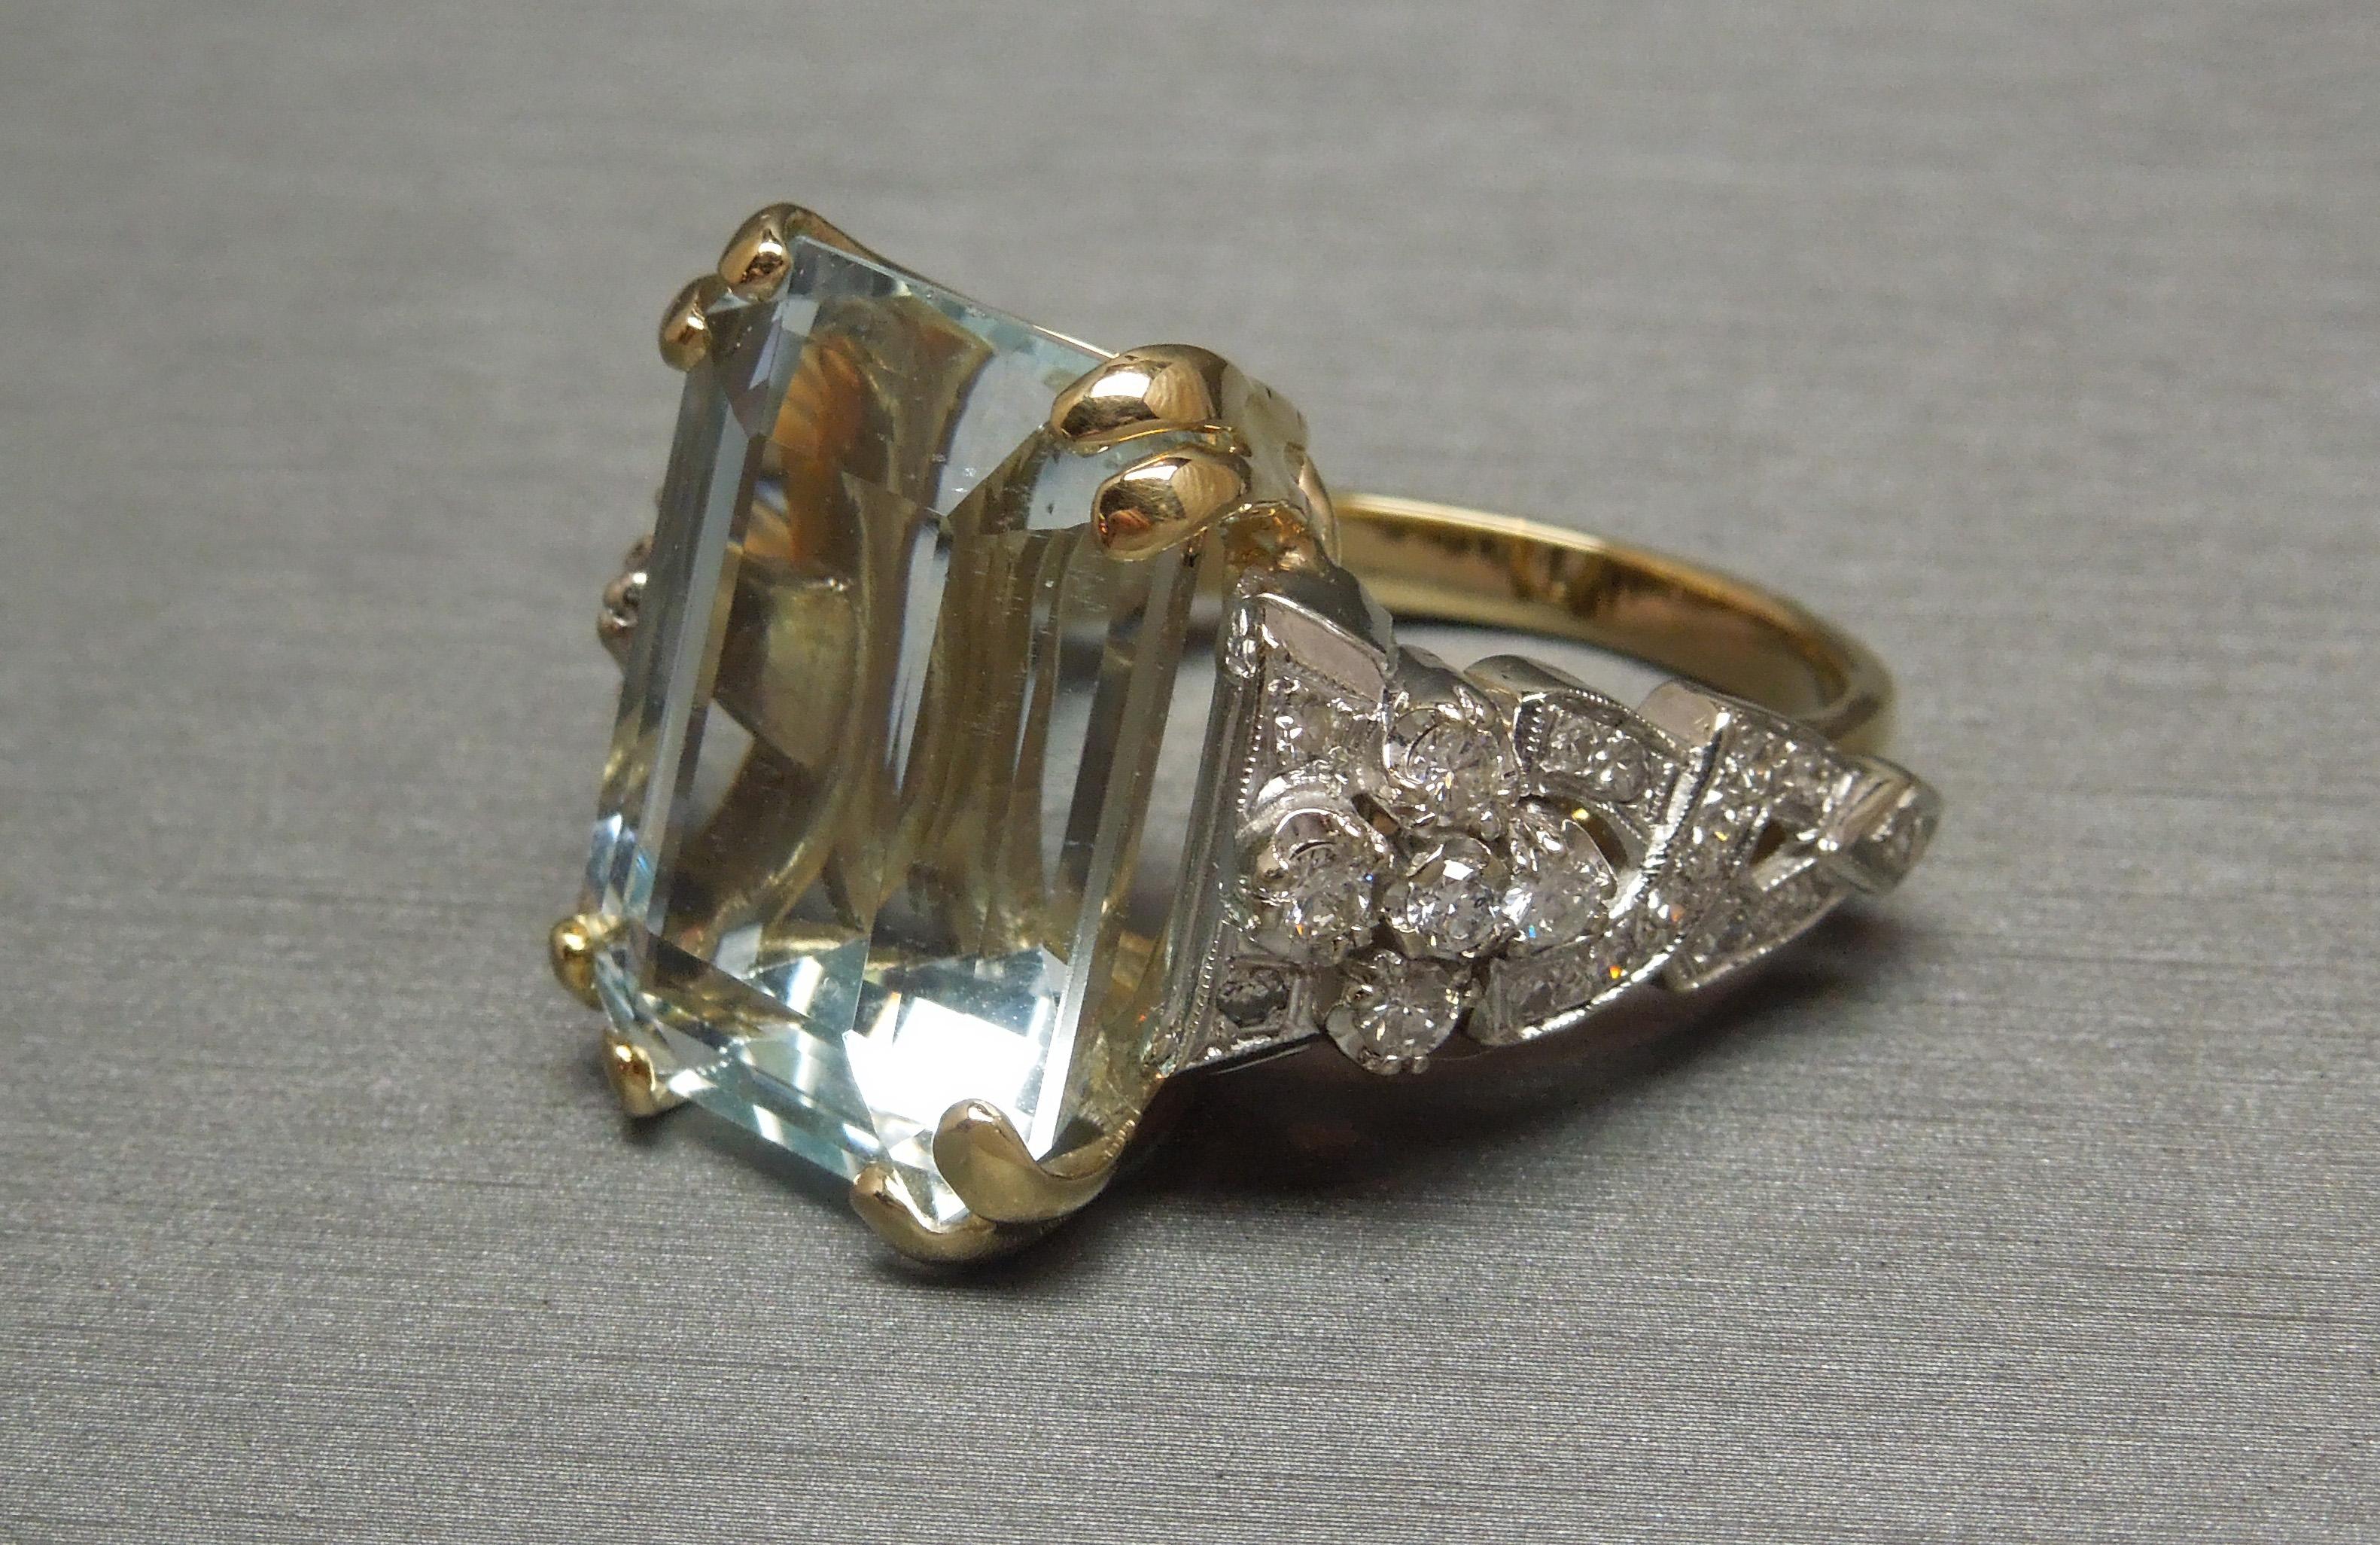 A central 22.50 carat GIA Certified Aquamarine in an opulent Emerald cut secured in 4 Doubled 14KT Yellow Gold prongs with Diamonds set at each side section in 14KT White Gold Art Deco designs consisting of Nearly Colorless Nearly Flawless Single